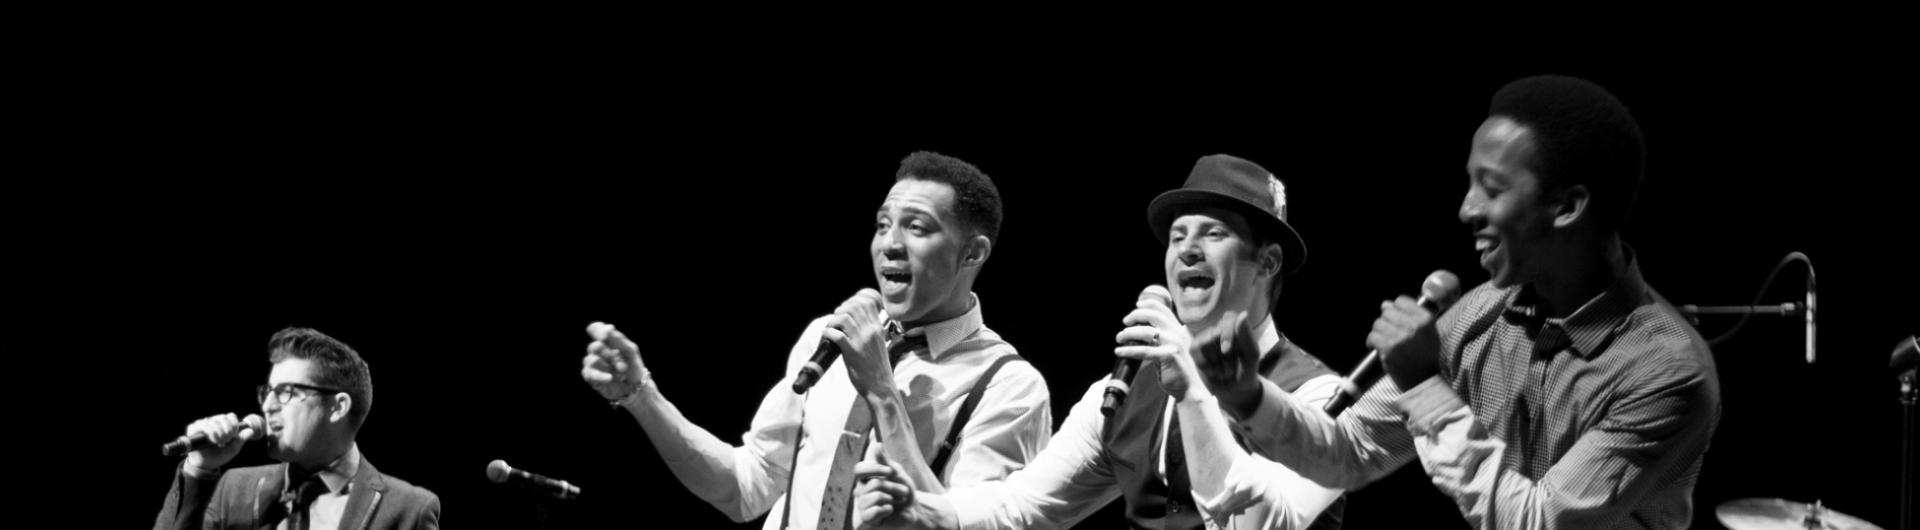 Members of The Doo Wop Project singing on stage against a dark background.